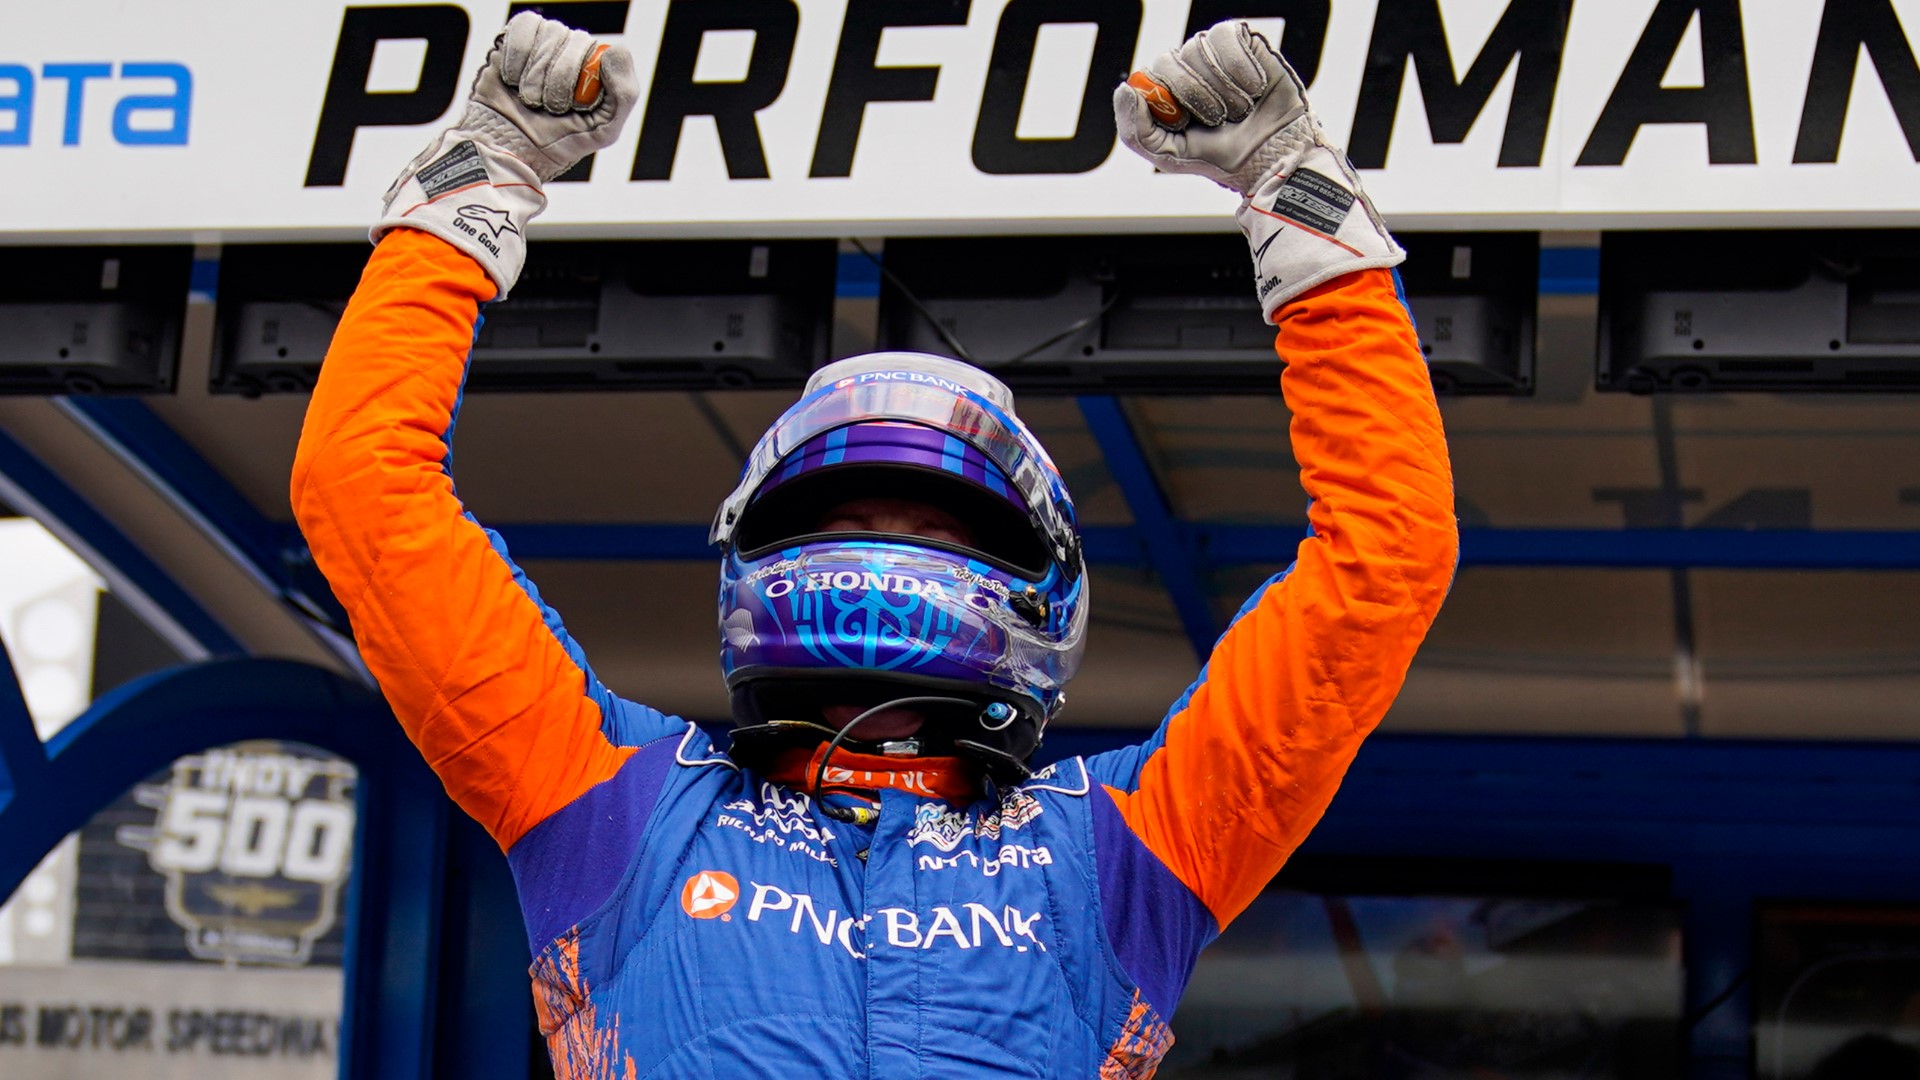 Scott Dixon will lead the field of 33 to the green flag for the 105th running of the Indianapolis 500.